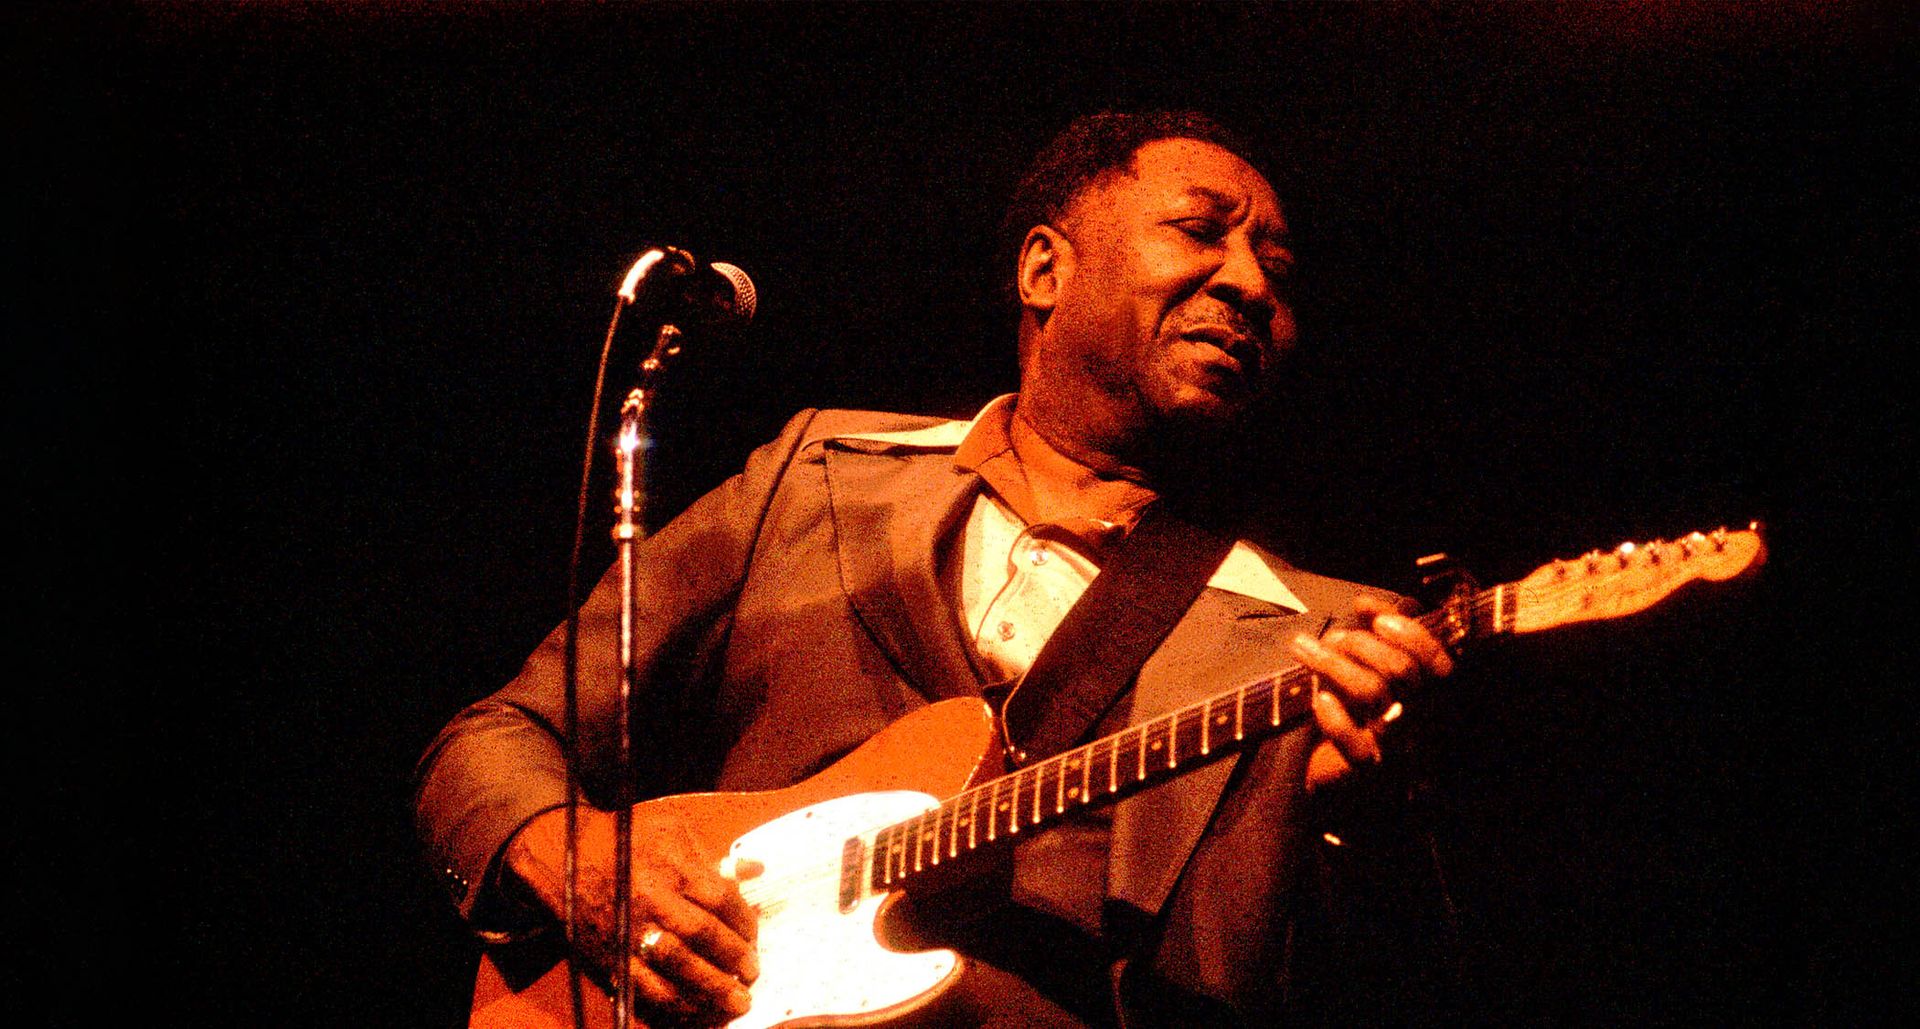 muddy waters is a blues guitar icon who pioneered the sound of electric guitar and invented a new solo language